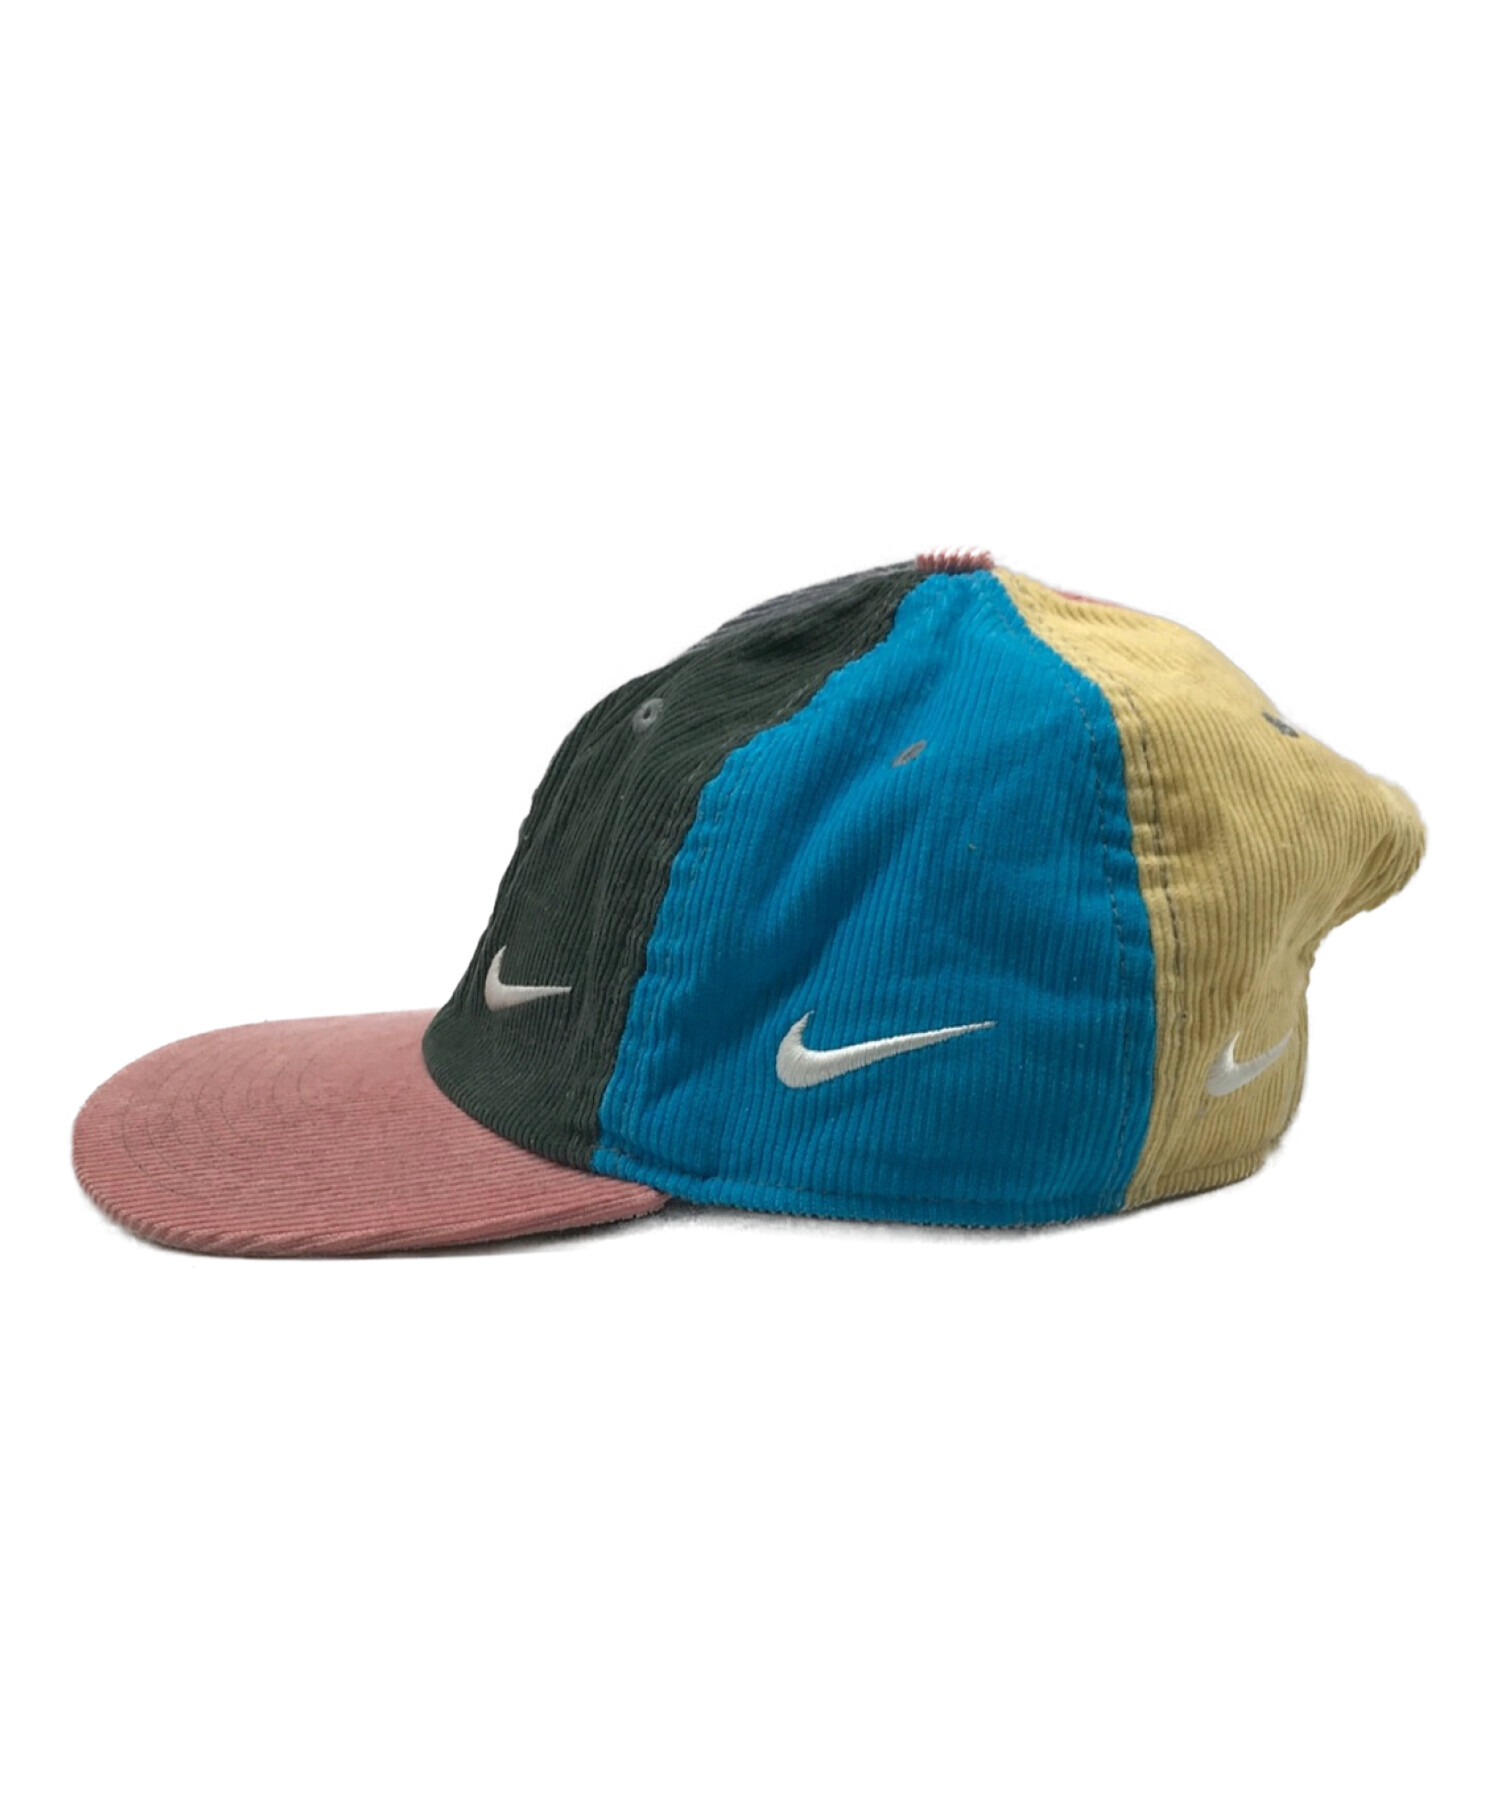 NIKE Sean Wotherspoon ショーンウェザースプーン　キャップ